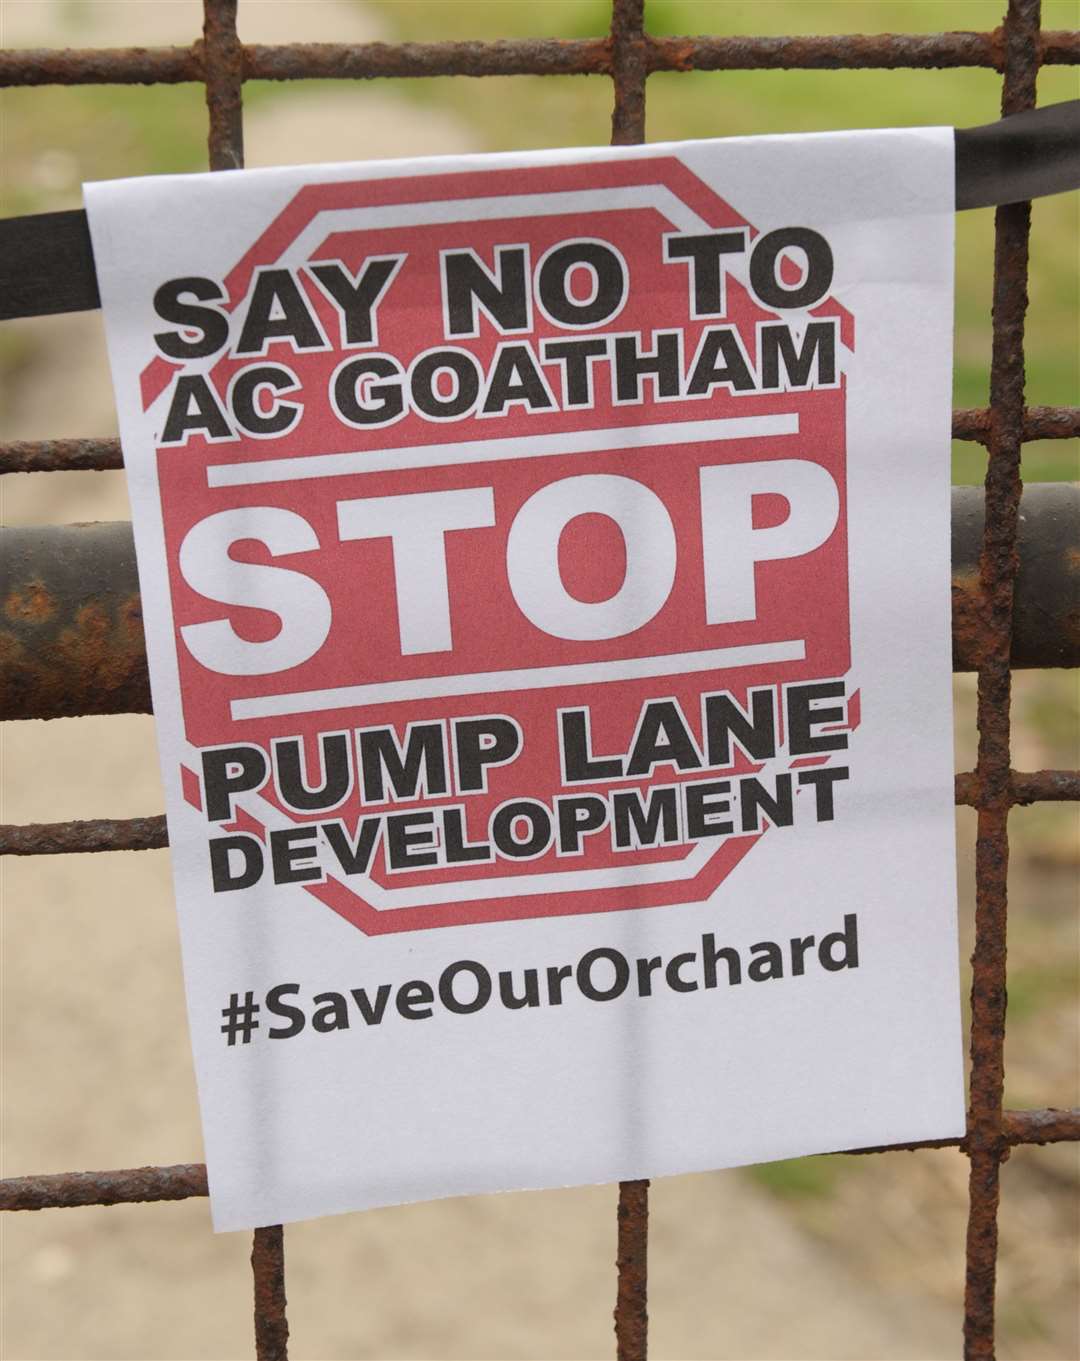 The "Save our Orchards" campaign was set up to stop the development in Pump Lane, Rainham, Picture: Steve Crispe